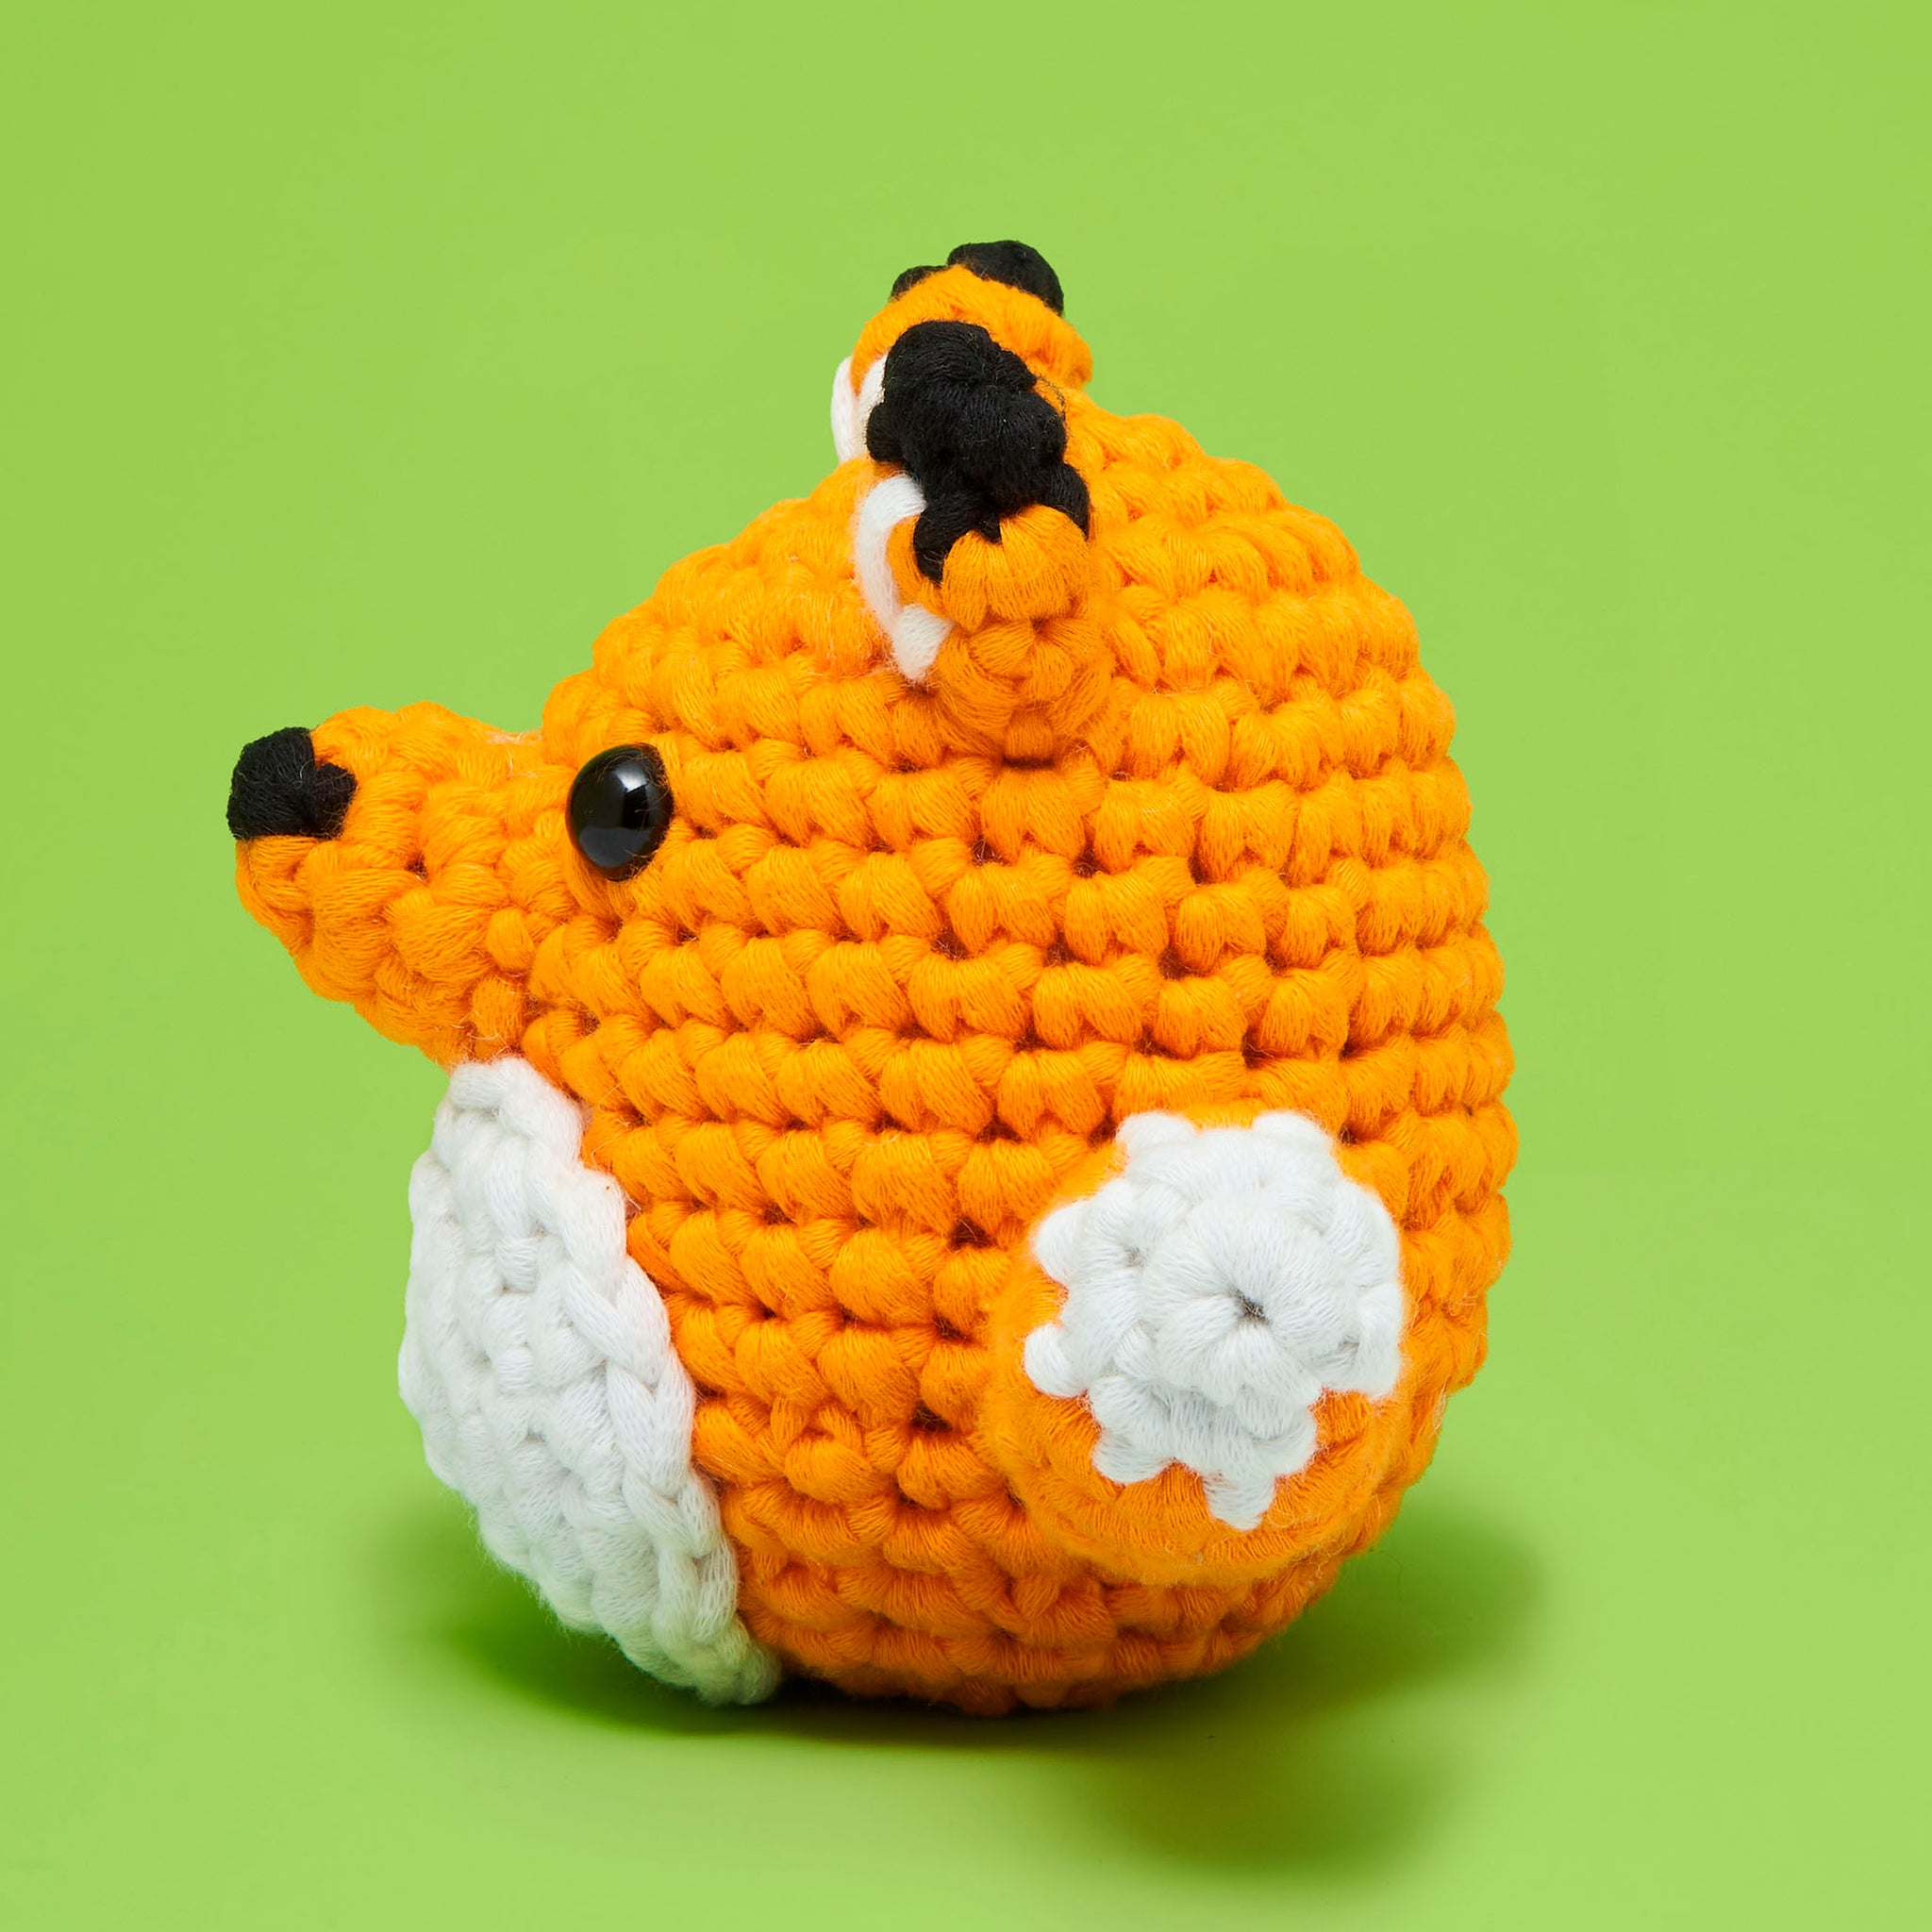 The Woobles Beginners Crochet Kit with Easy Peasy Yarn as seen on Shark  Tank - Crochet Kit for Beginners with Step-by-Step Video Tutorials - Felix  The Fox